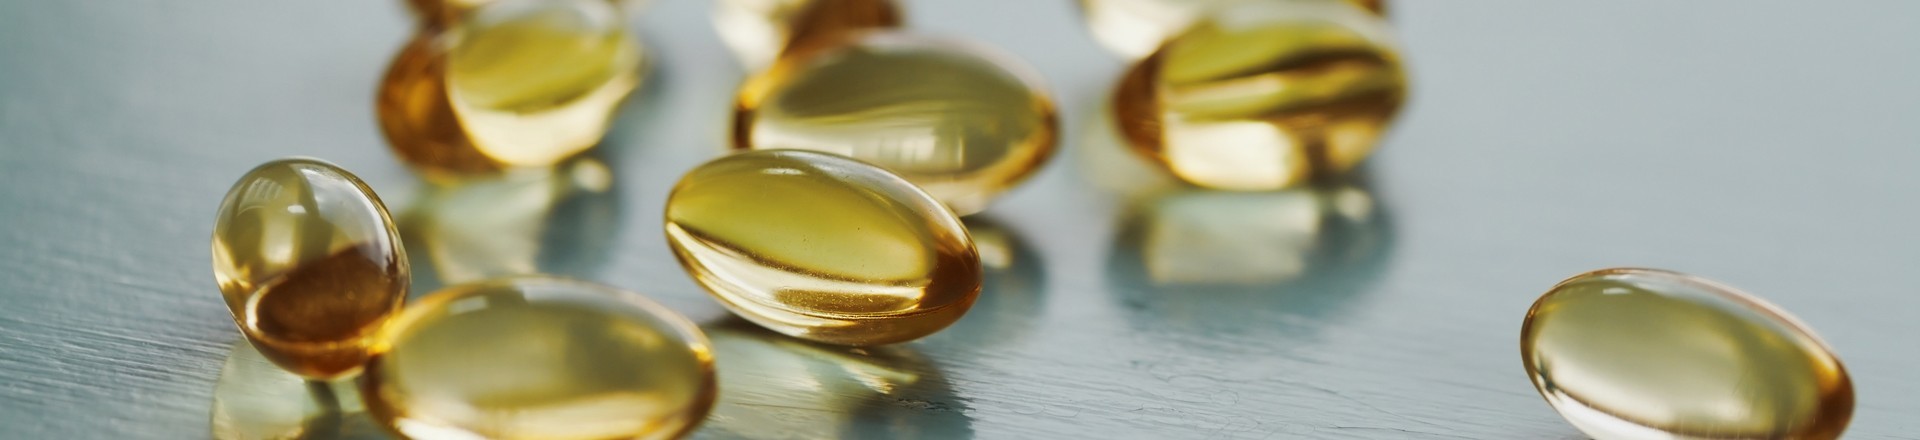 how much vitamin E is safe to take?